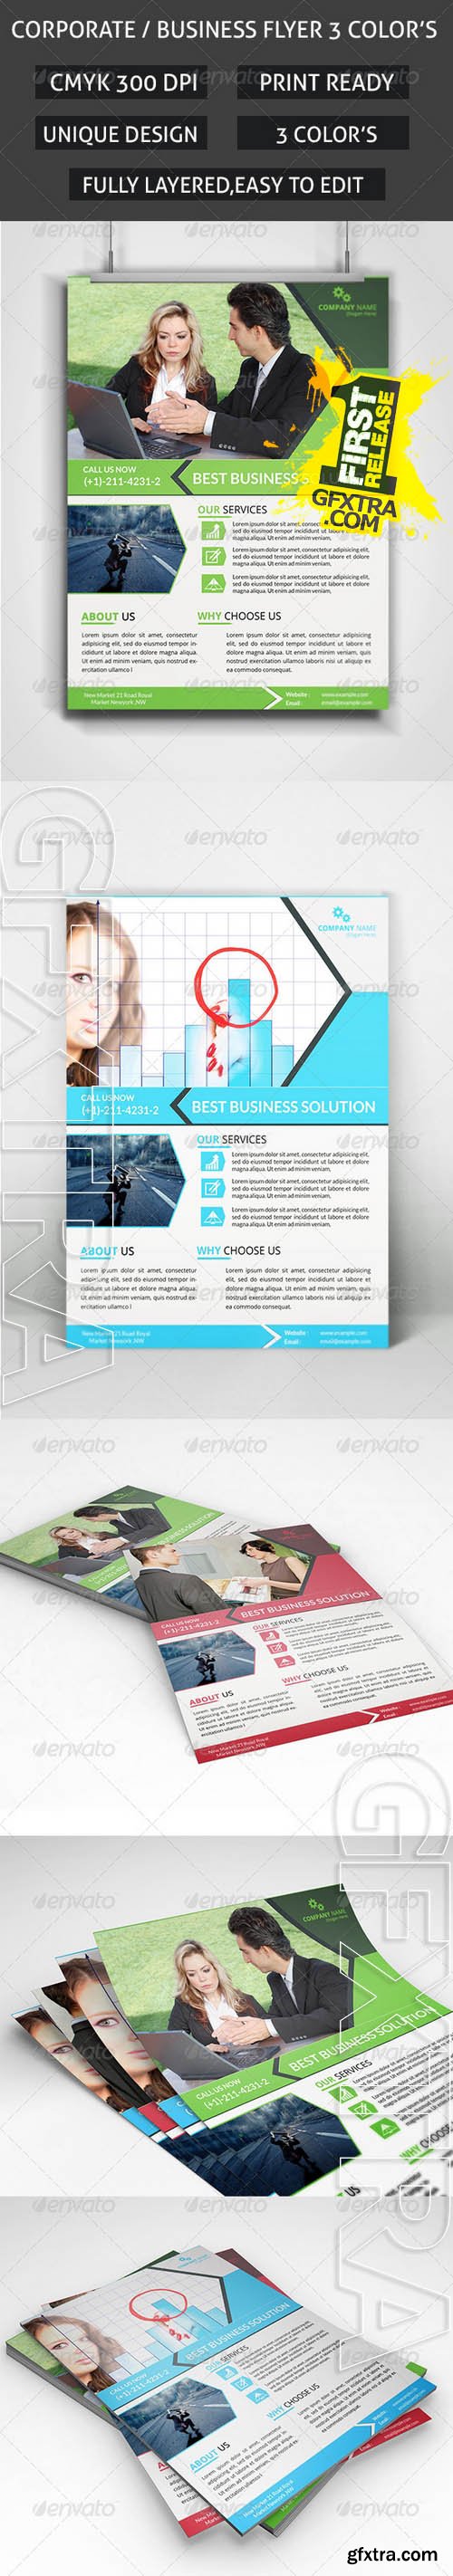 Business Flyer 3 Colors - GraphicRiver 8756576